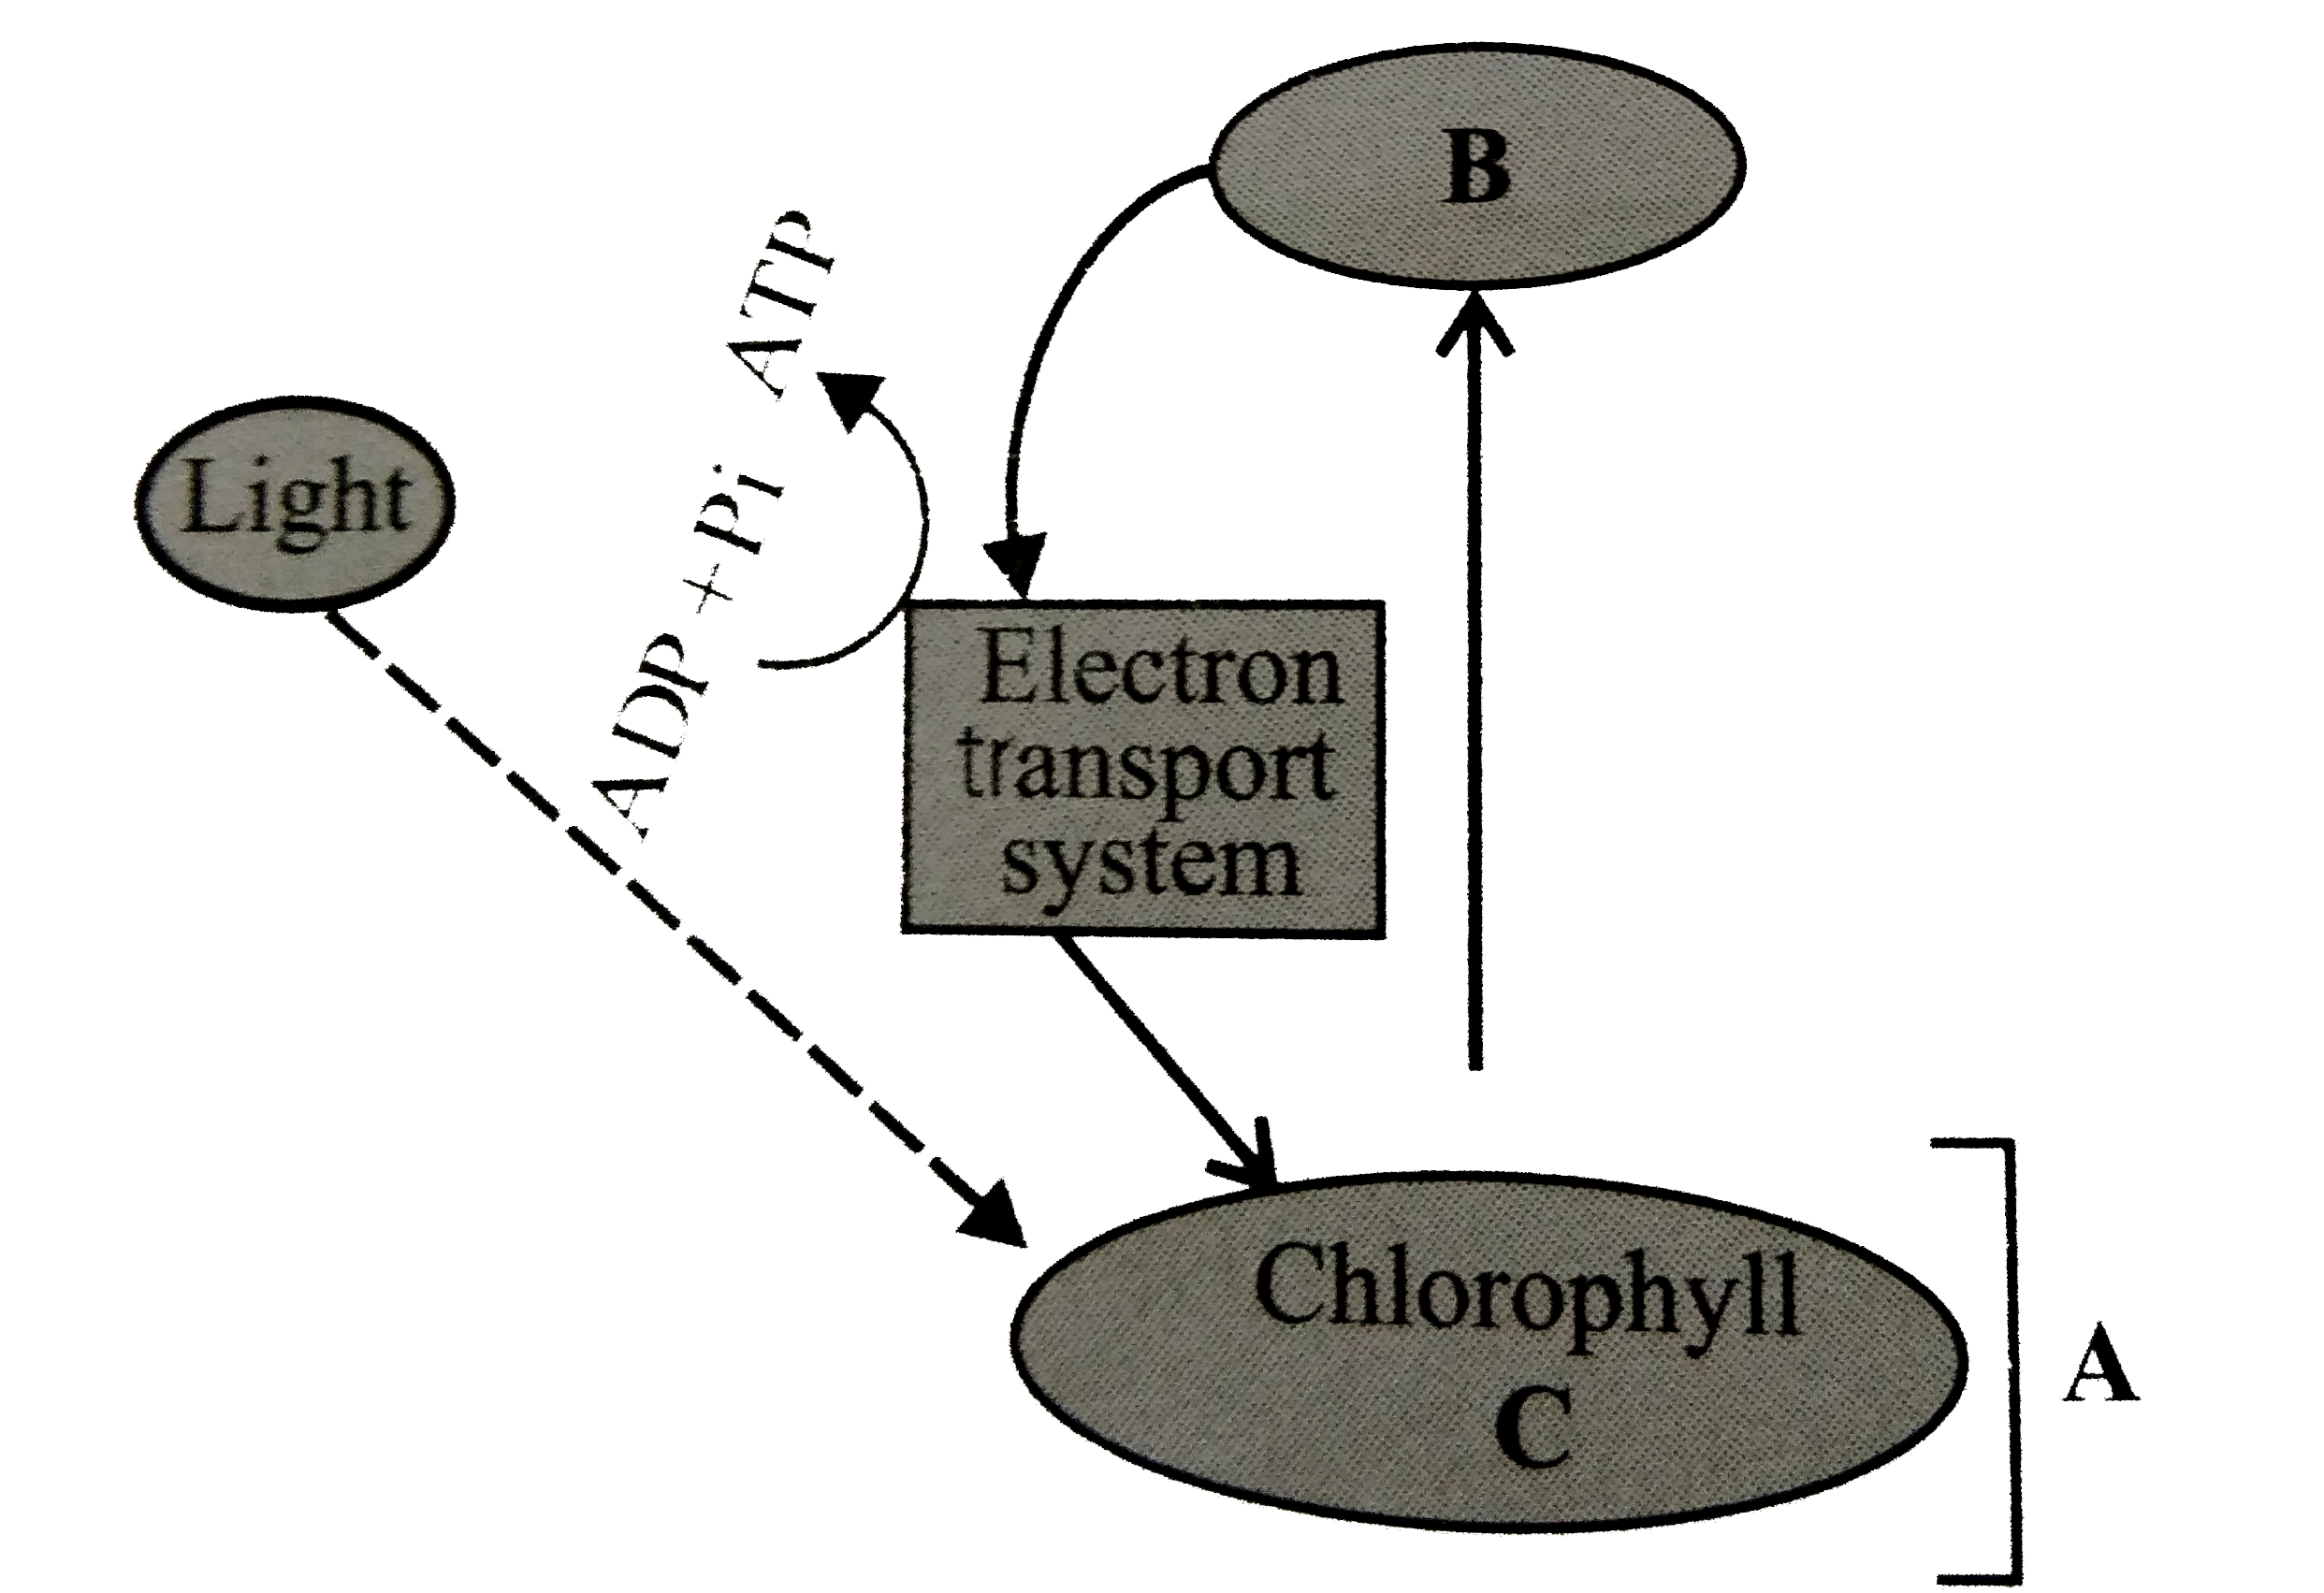 Study the given flow chart of cyclic photophosphorylation and selct the correct answer for A,B and C